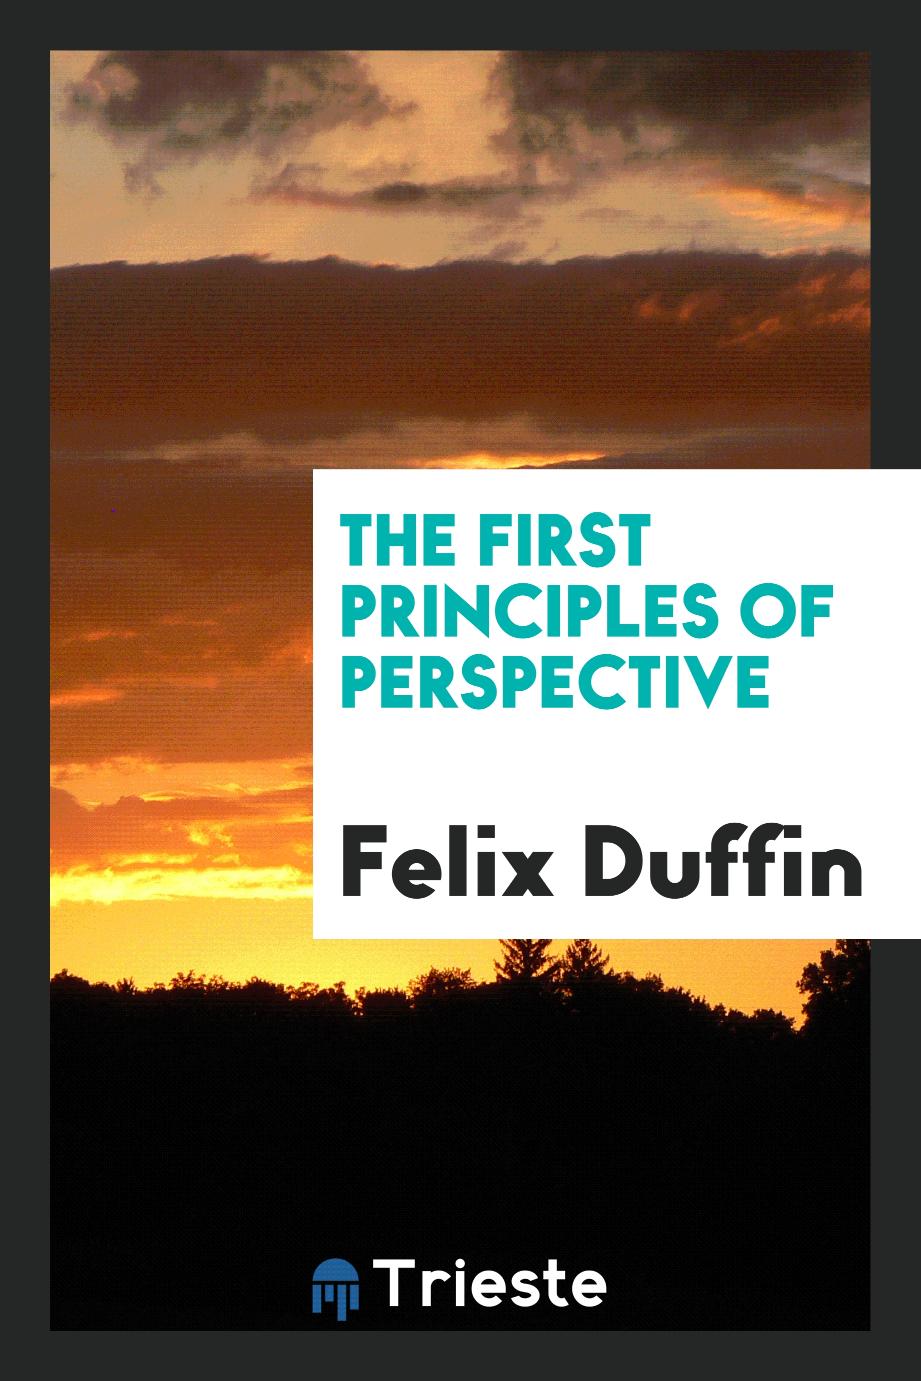 The first principles of perspective